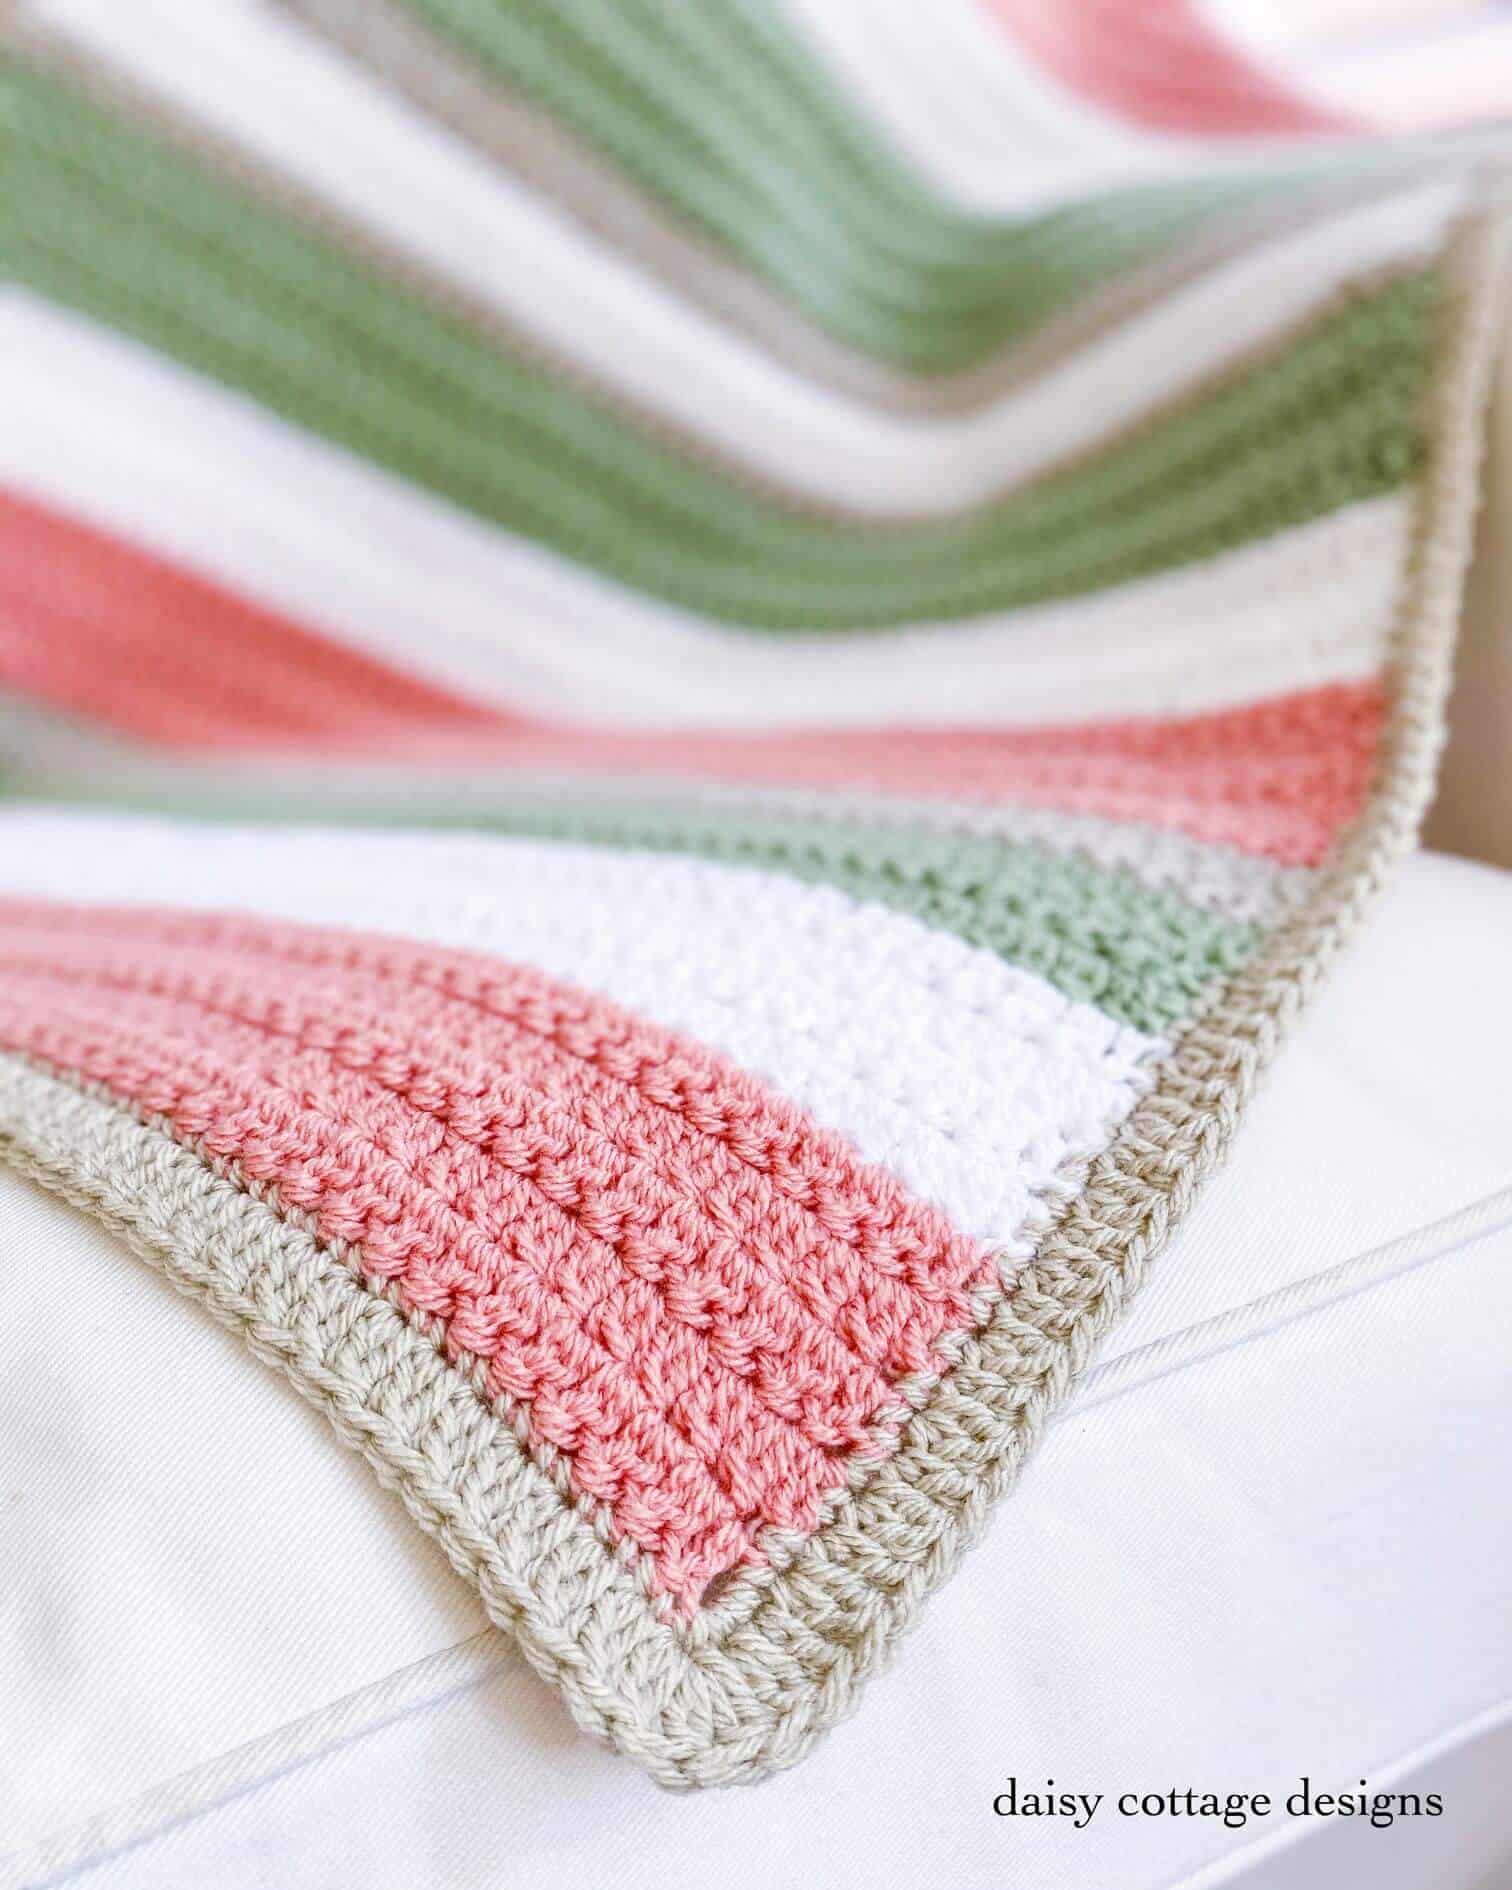 Use this quick and easy crochet pattern to create a beautiful stripe crochet blanket. Make it in any size and give it as a wonderful crochet gift. A great crochet blanket tutorial! 